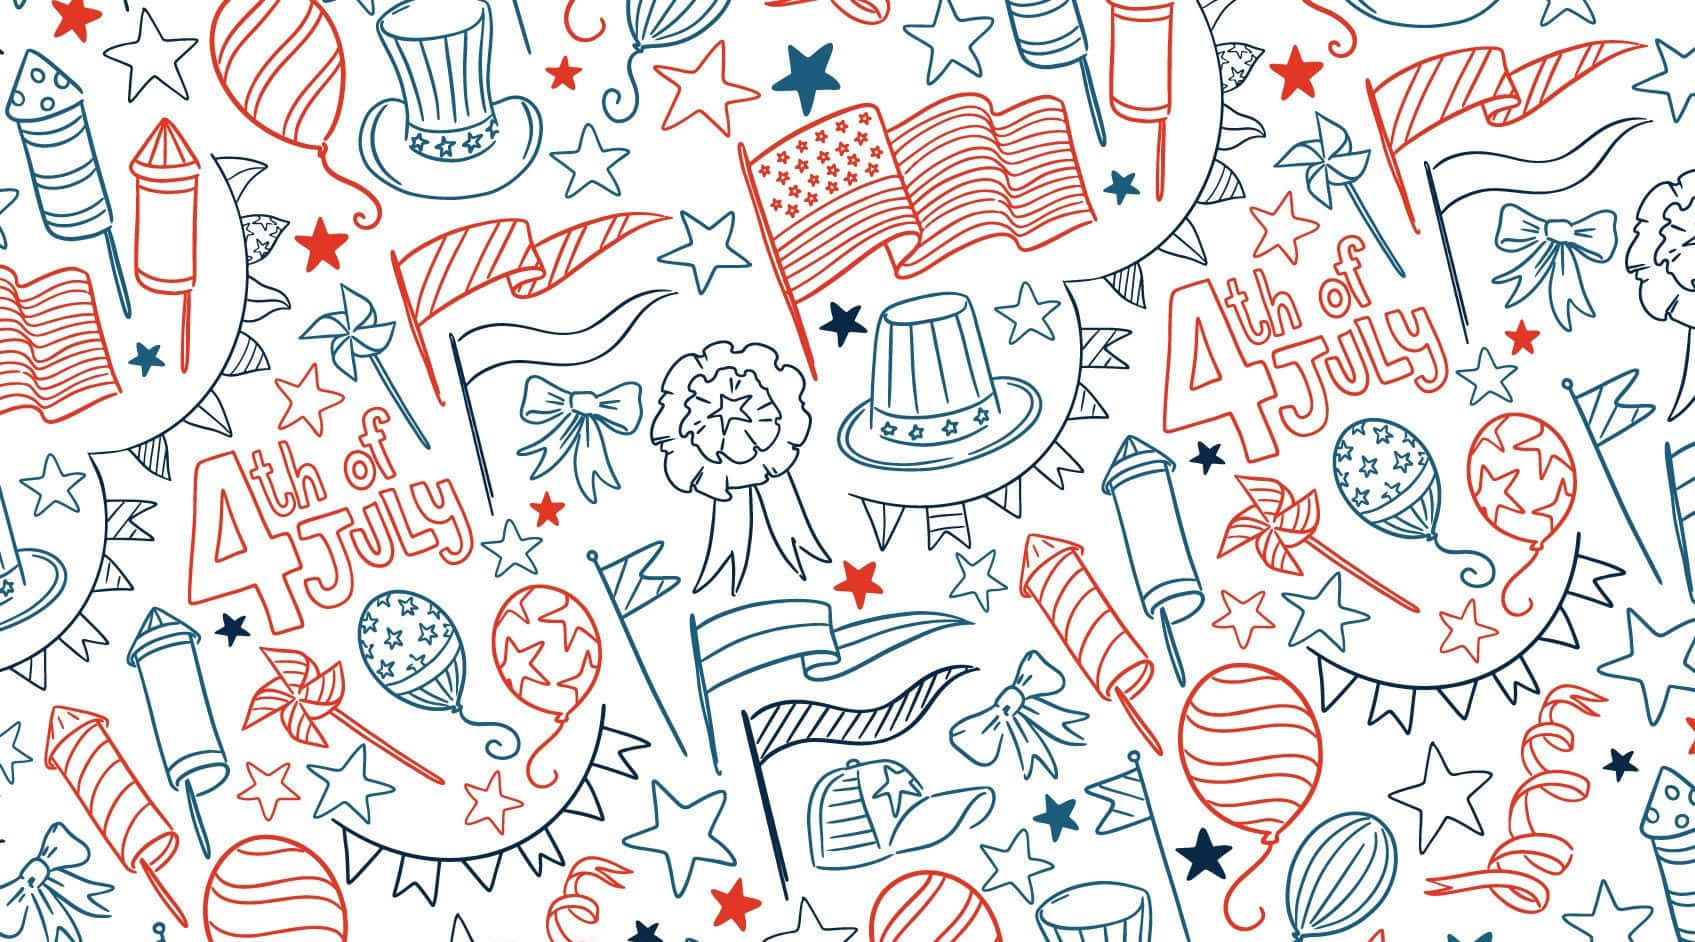 "Celebrate Independence Day with a cute 4th of July background!"